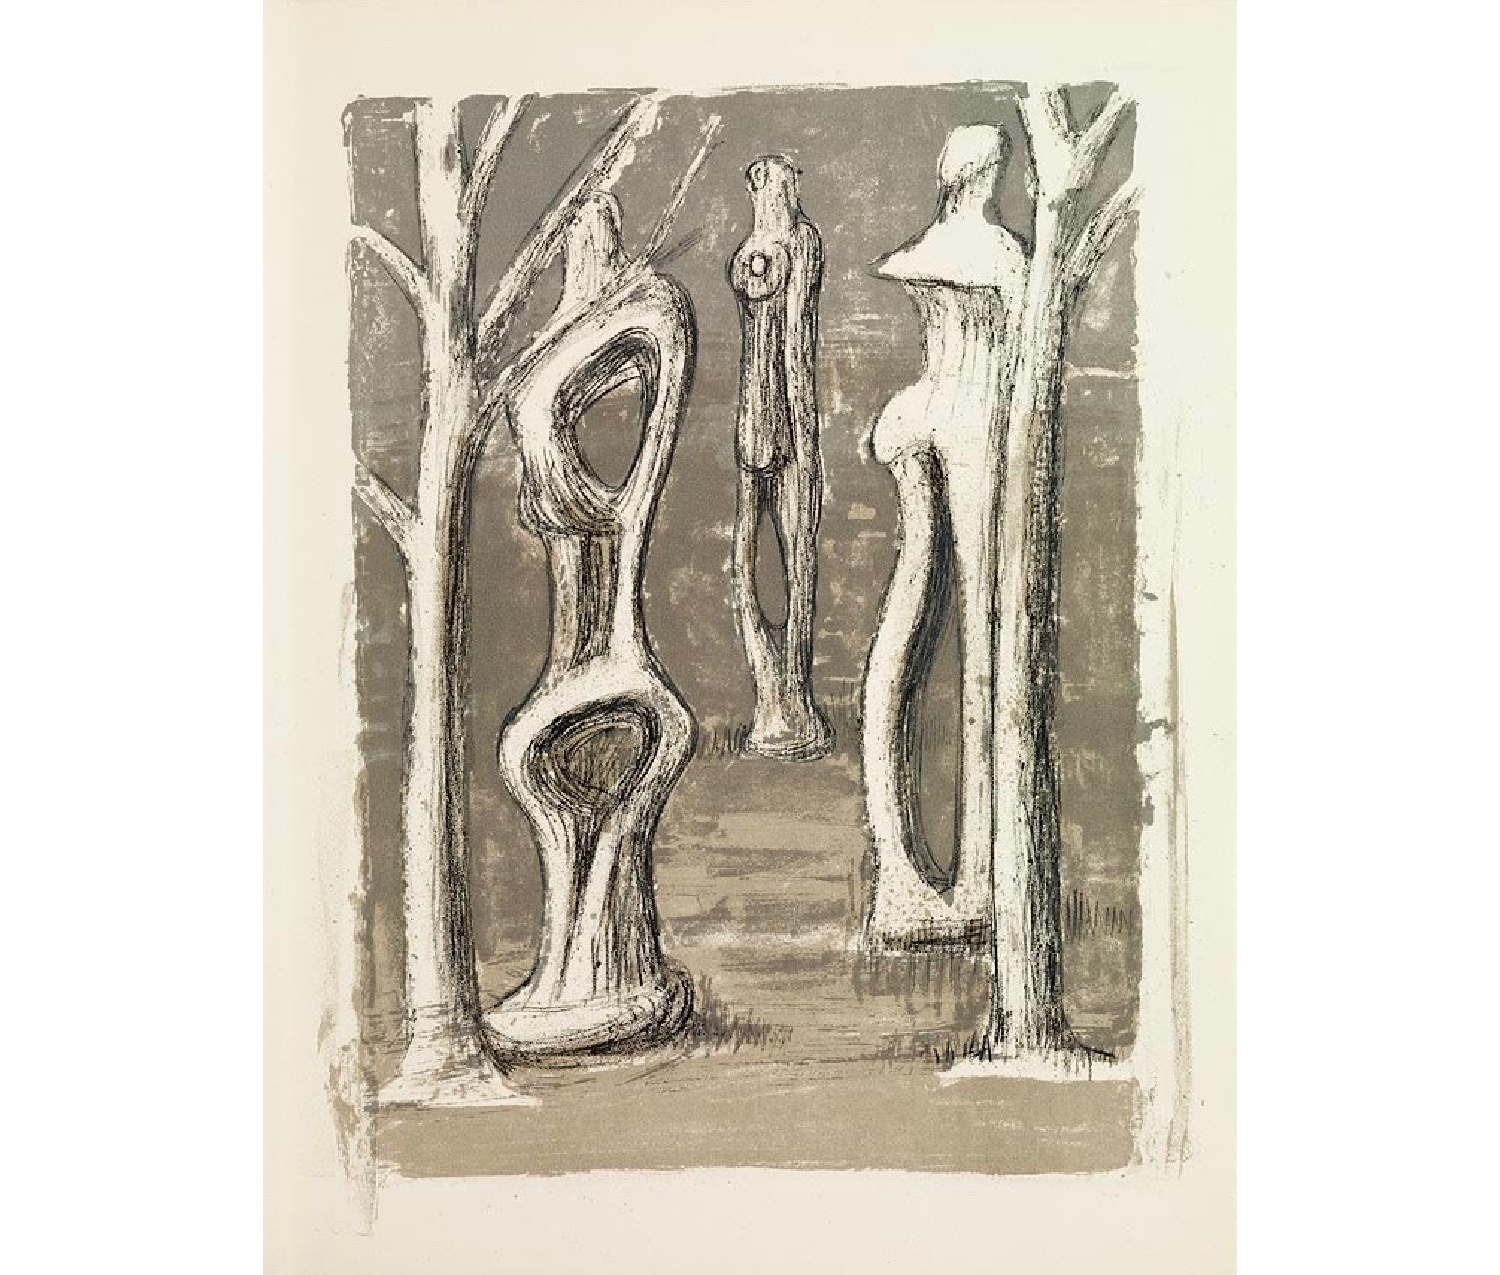 Three figures standing spaced between similarly tall and slender trees in shades of gray.